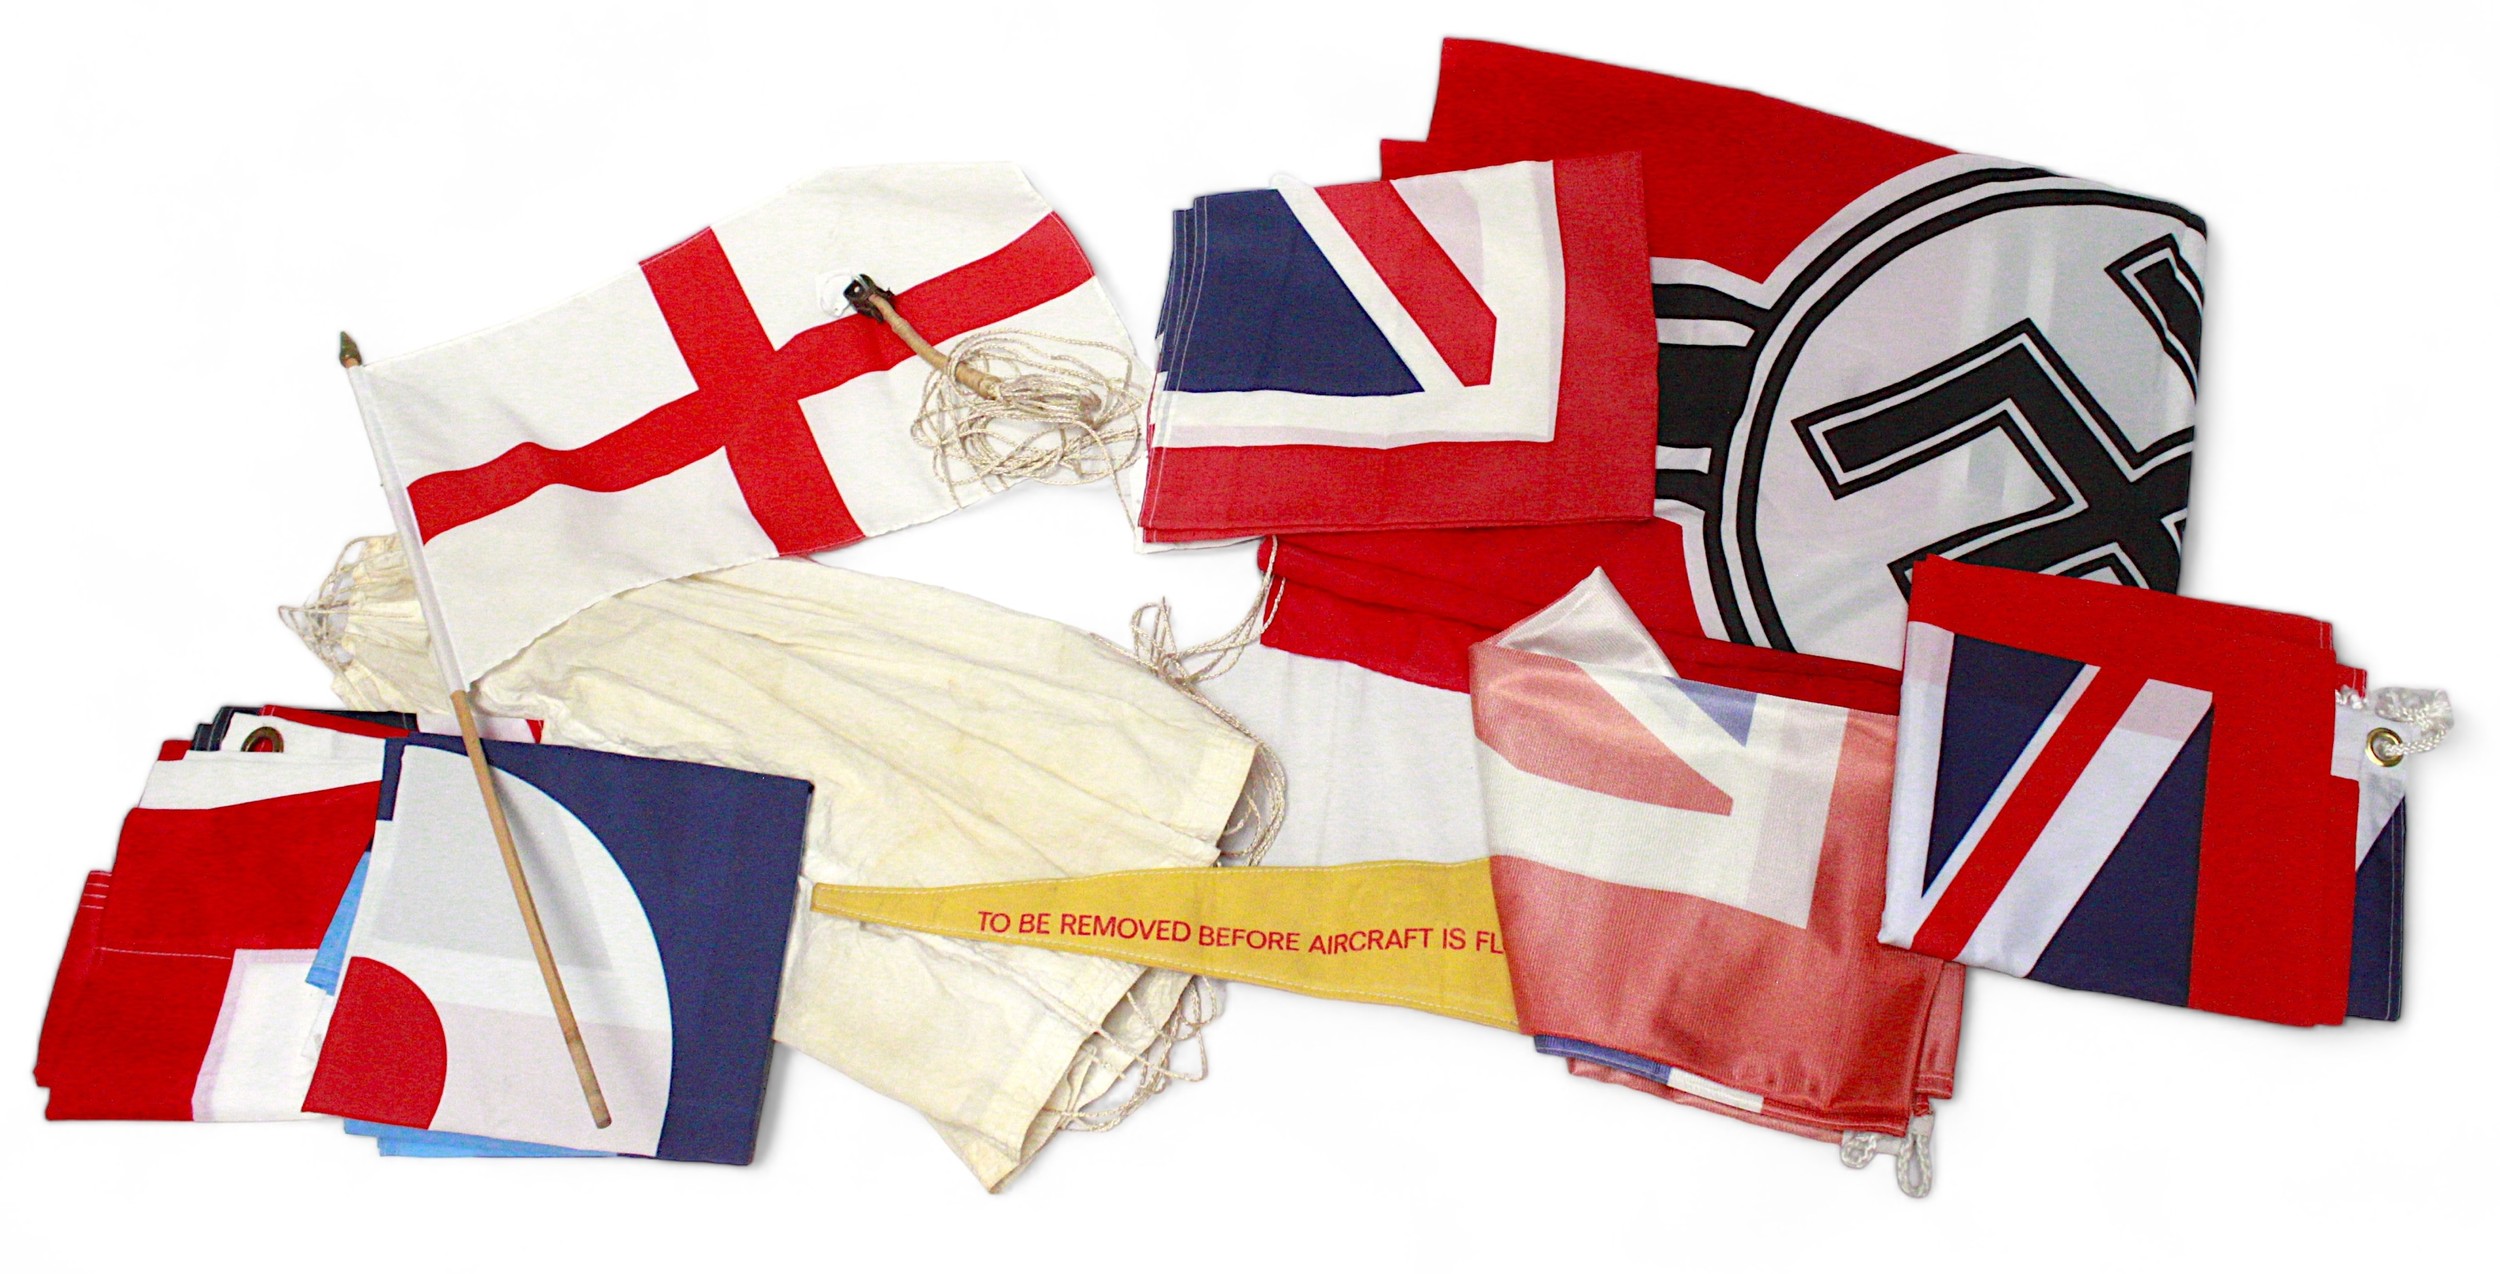 A white silk pilot chute, Aircraft pennant, together with various Union Jacks and German flag